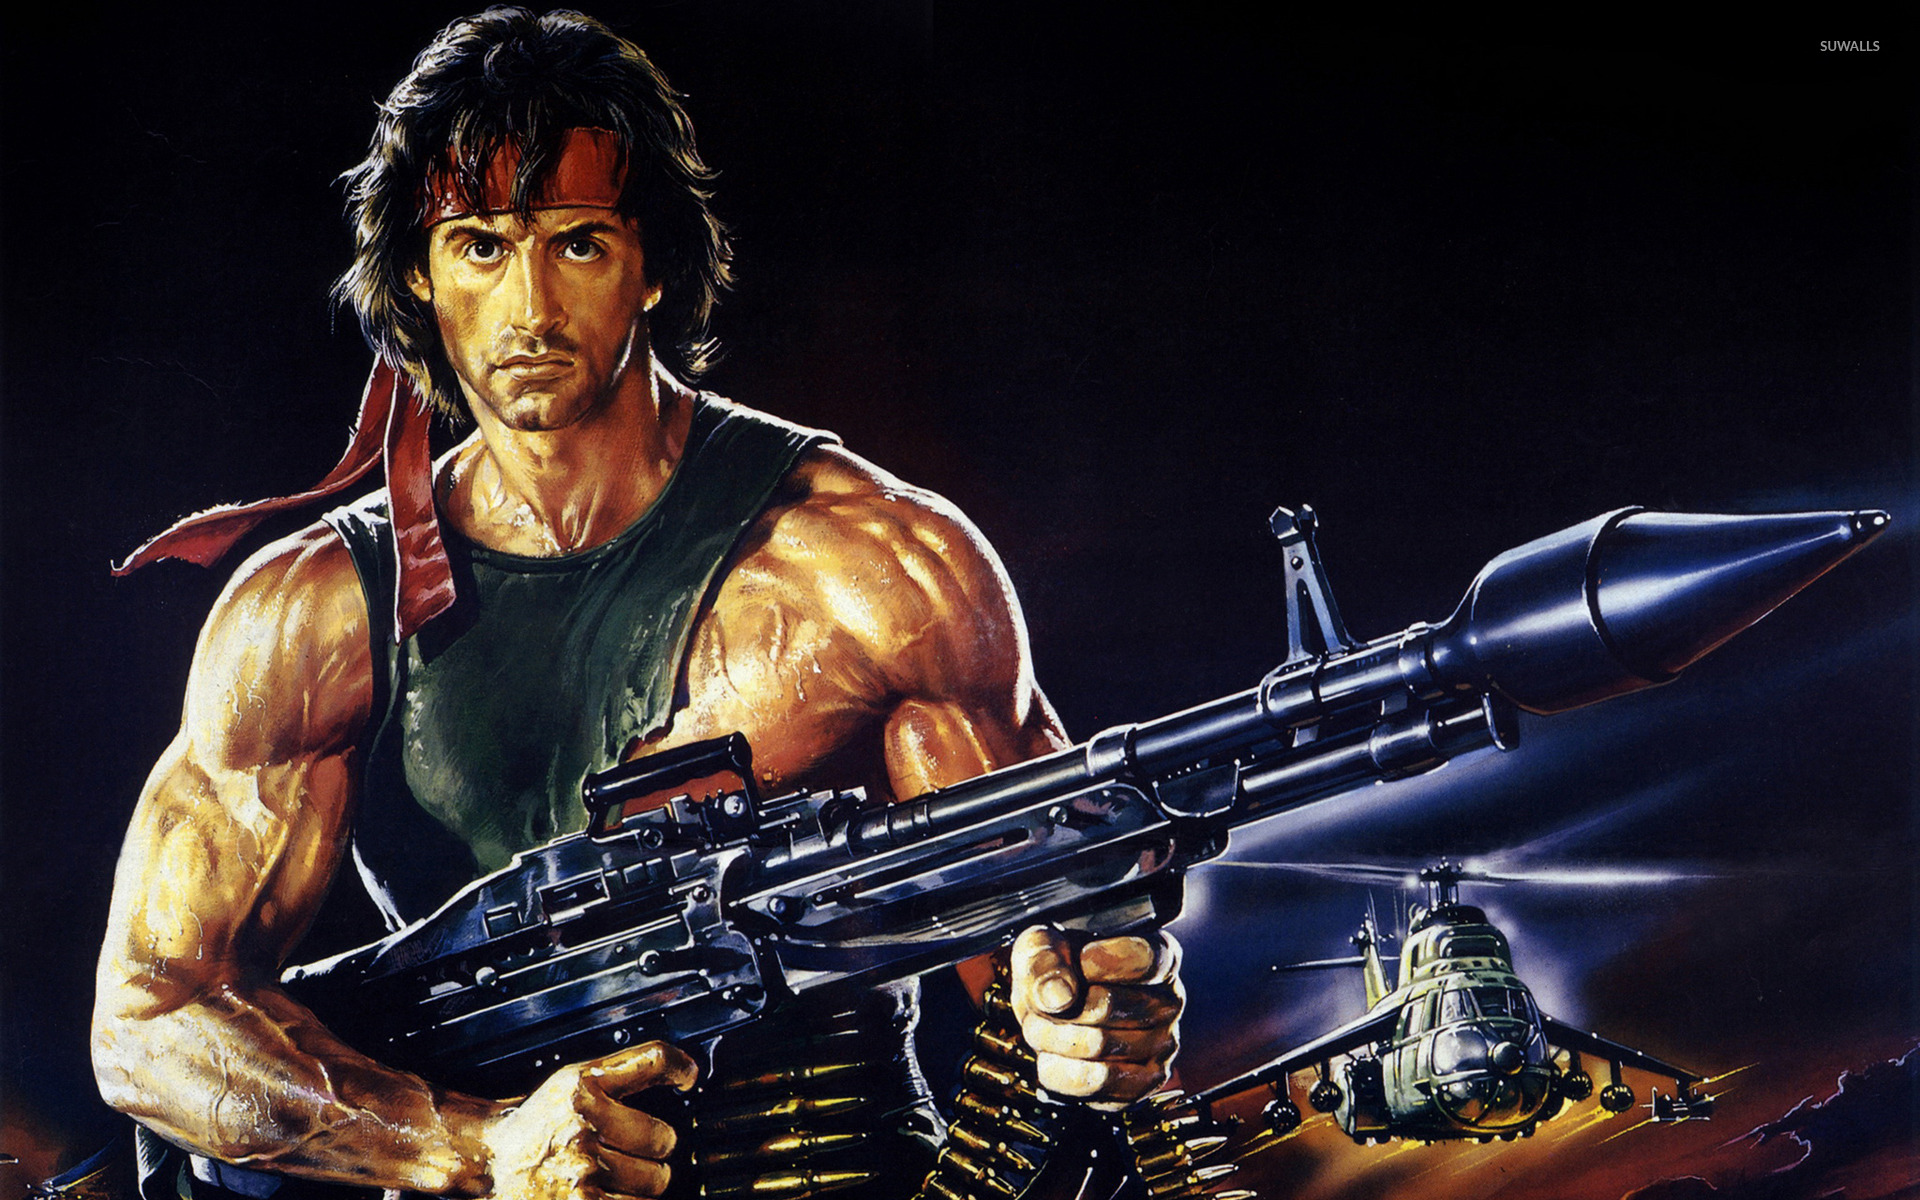 download rambo first blood video game for free